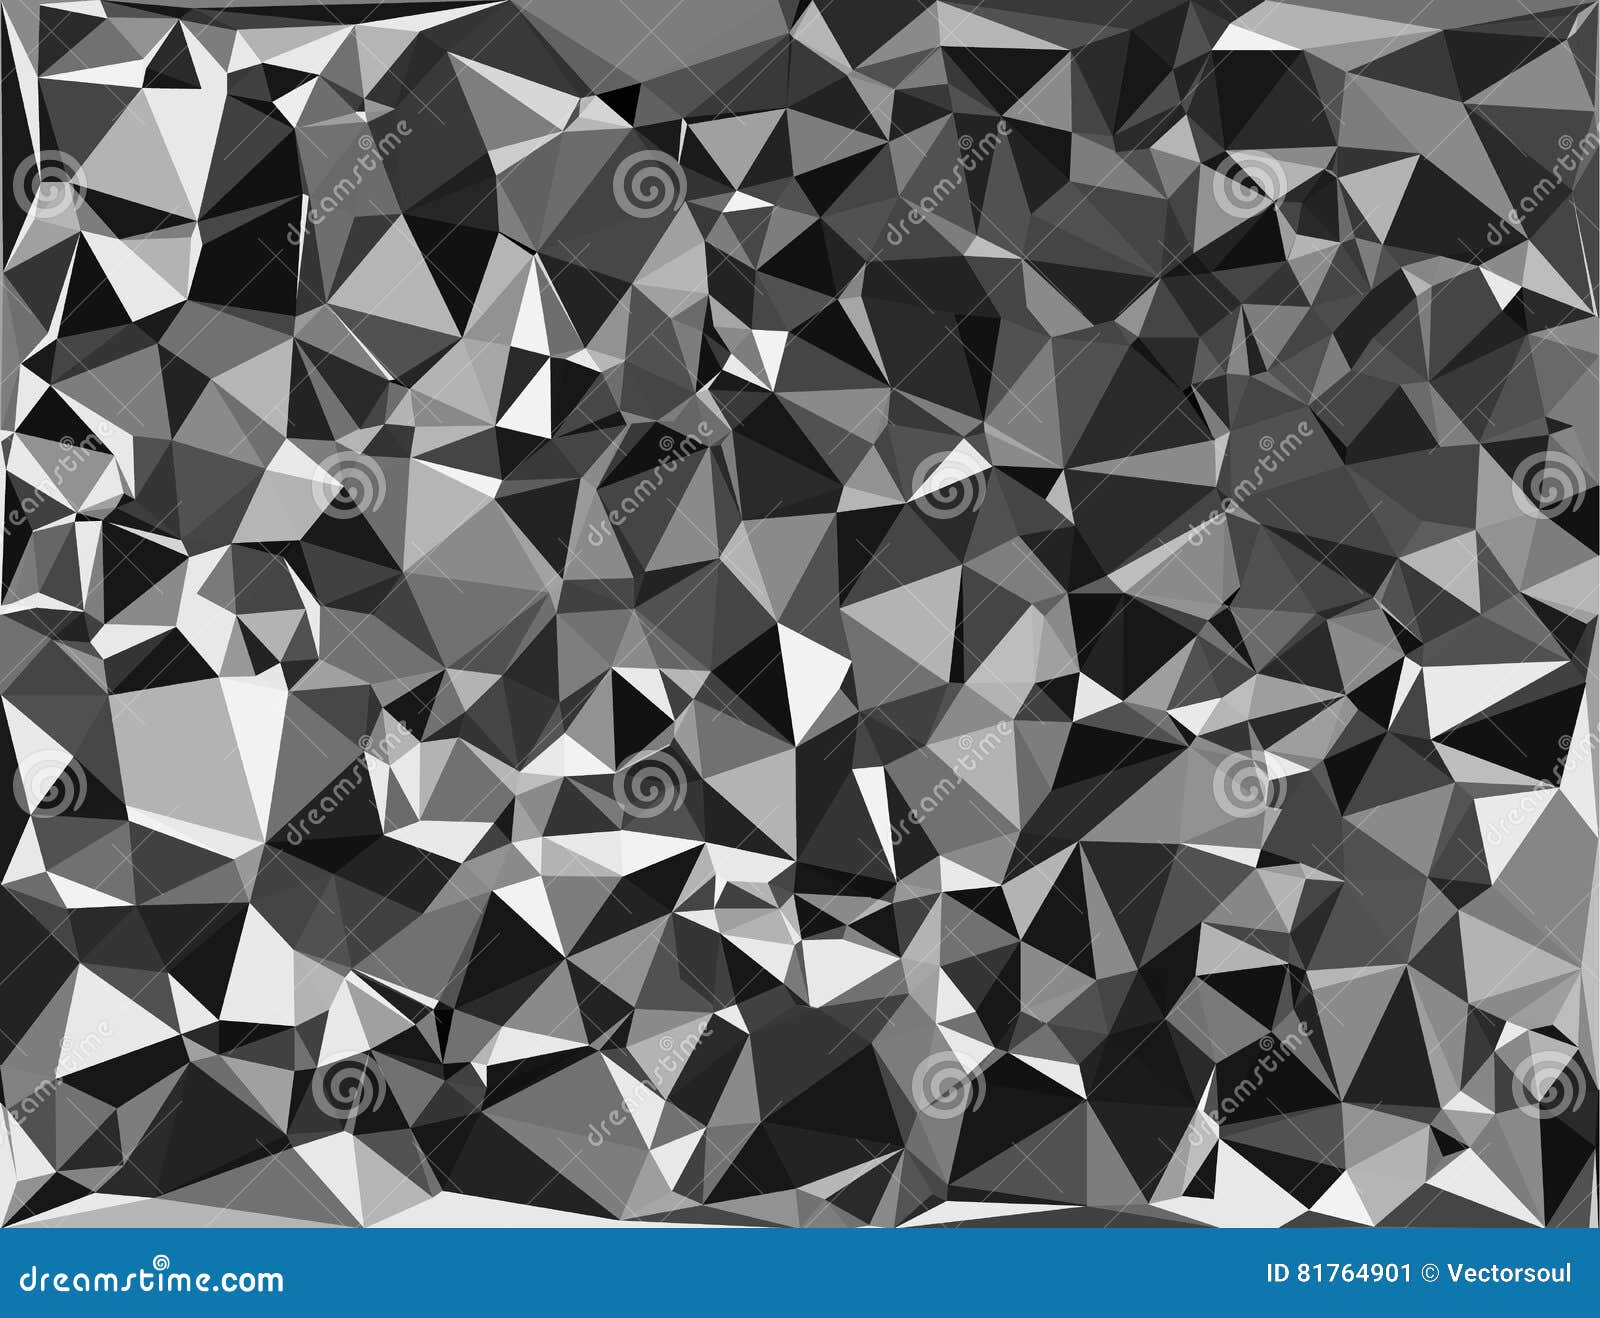 tessellating random triangles pattern, background fitting space